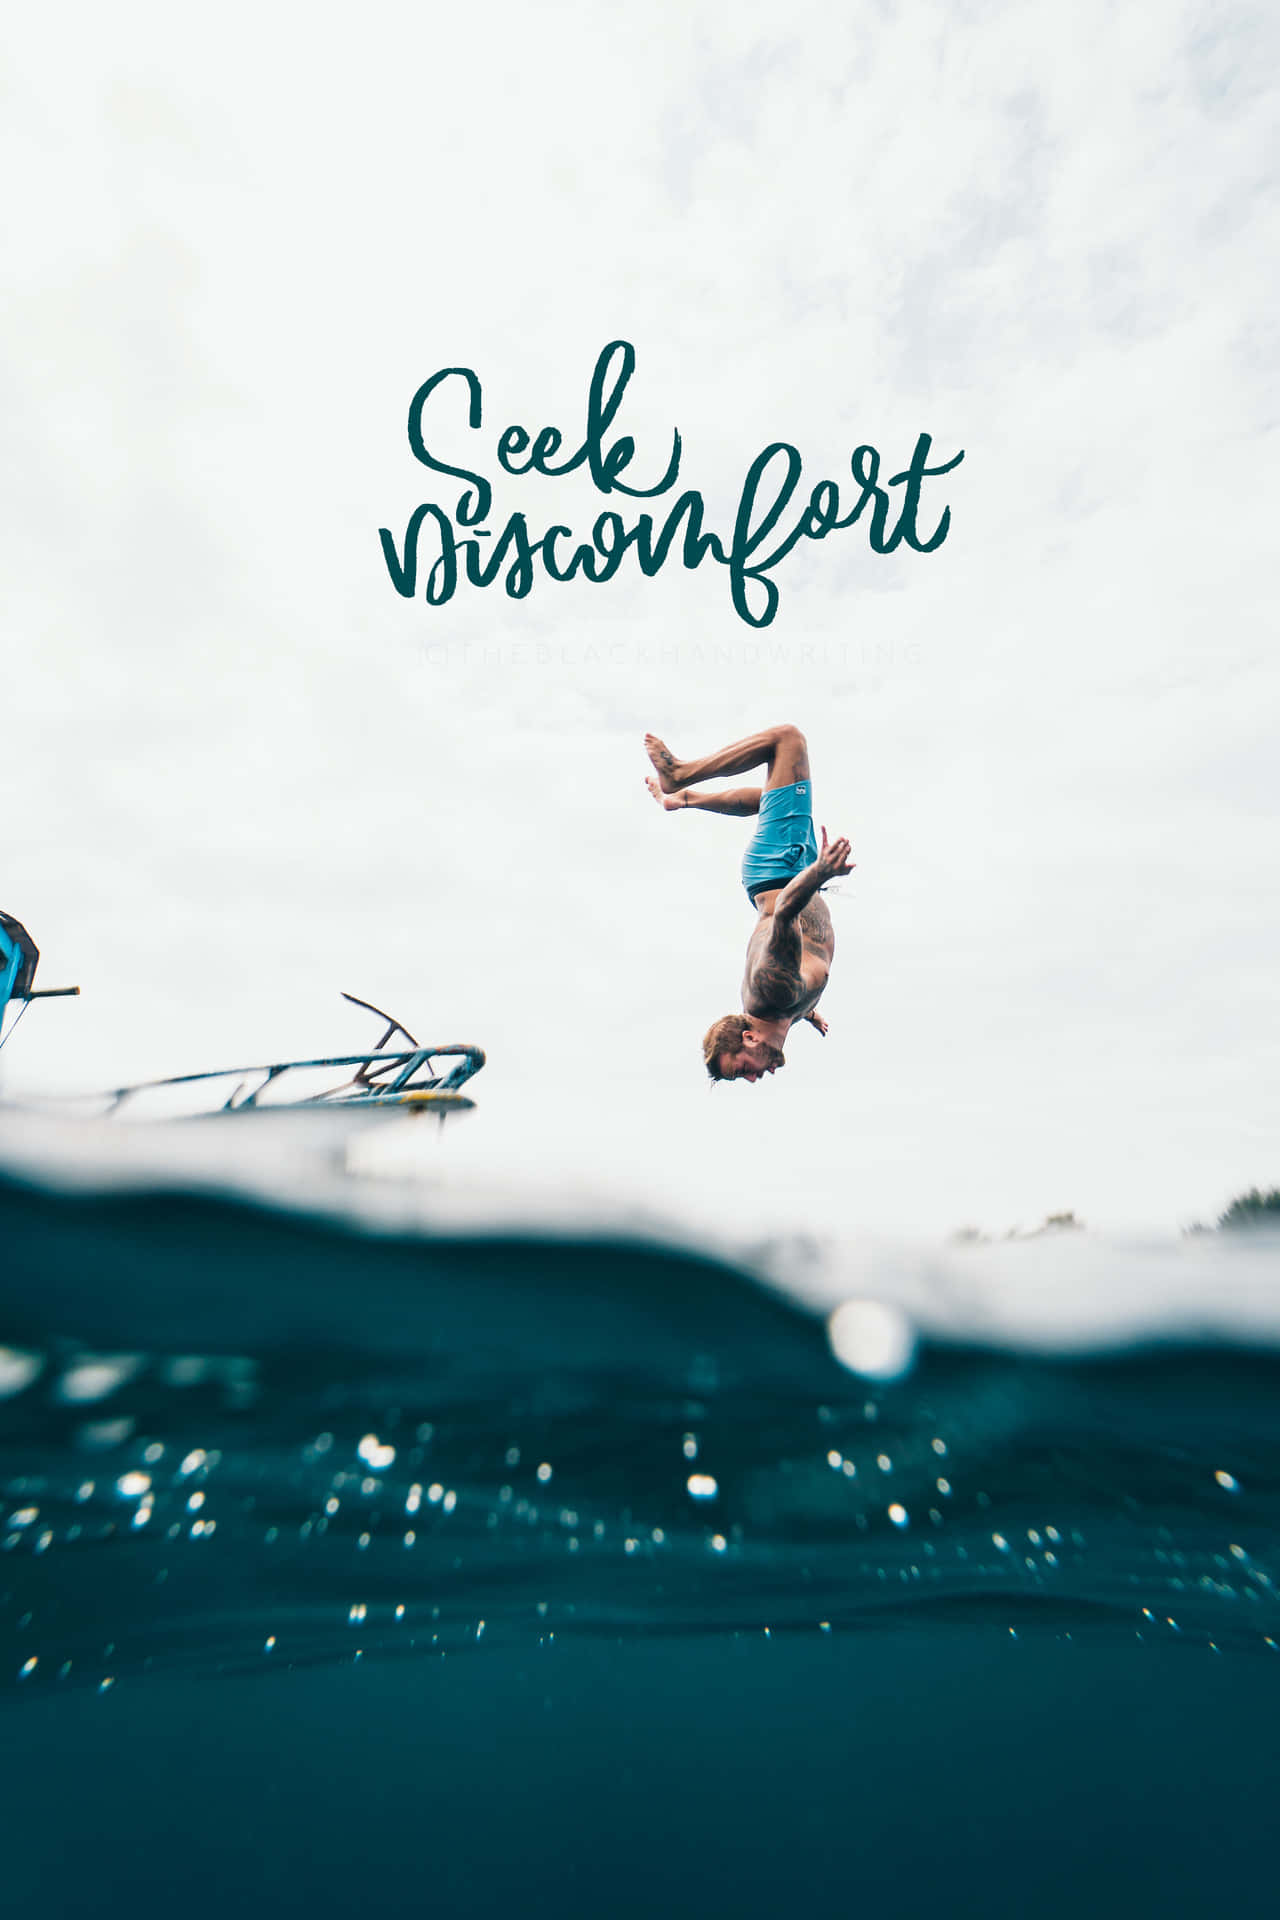 A Man Is Diving Into The Ocean With The Words Seek Visionfort Wallpaper